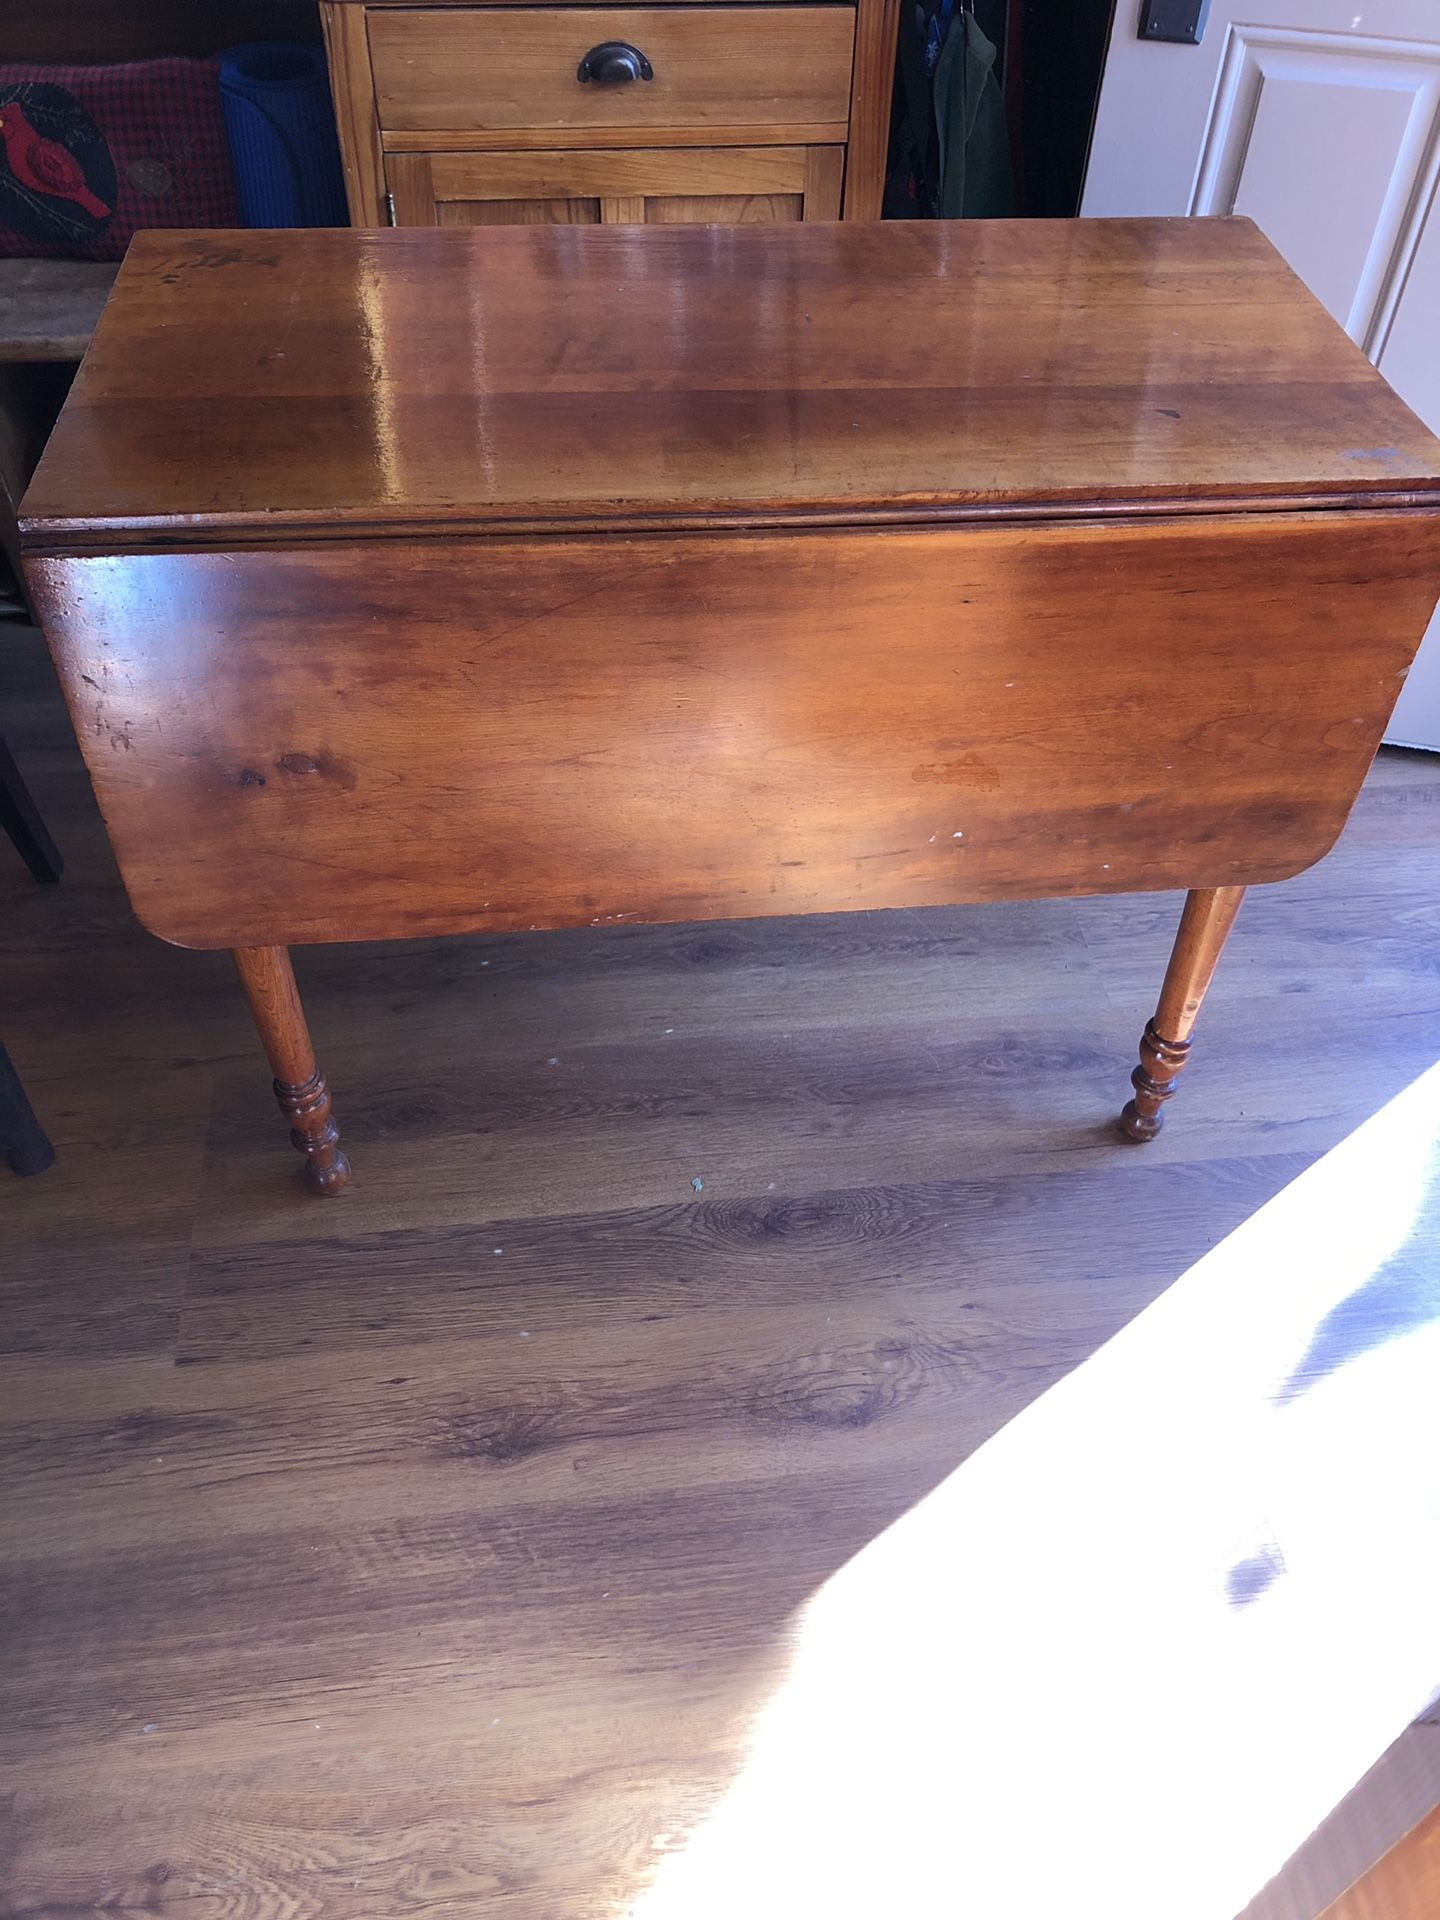 Antique table that coverts to table for 4